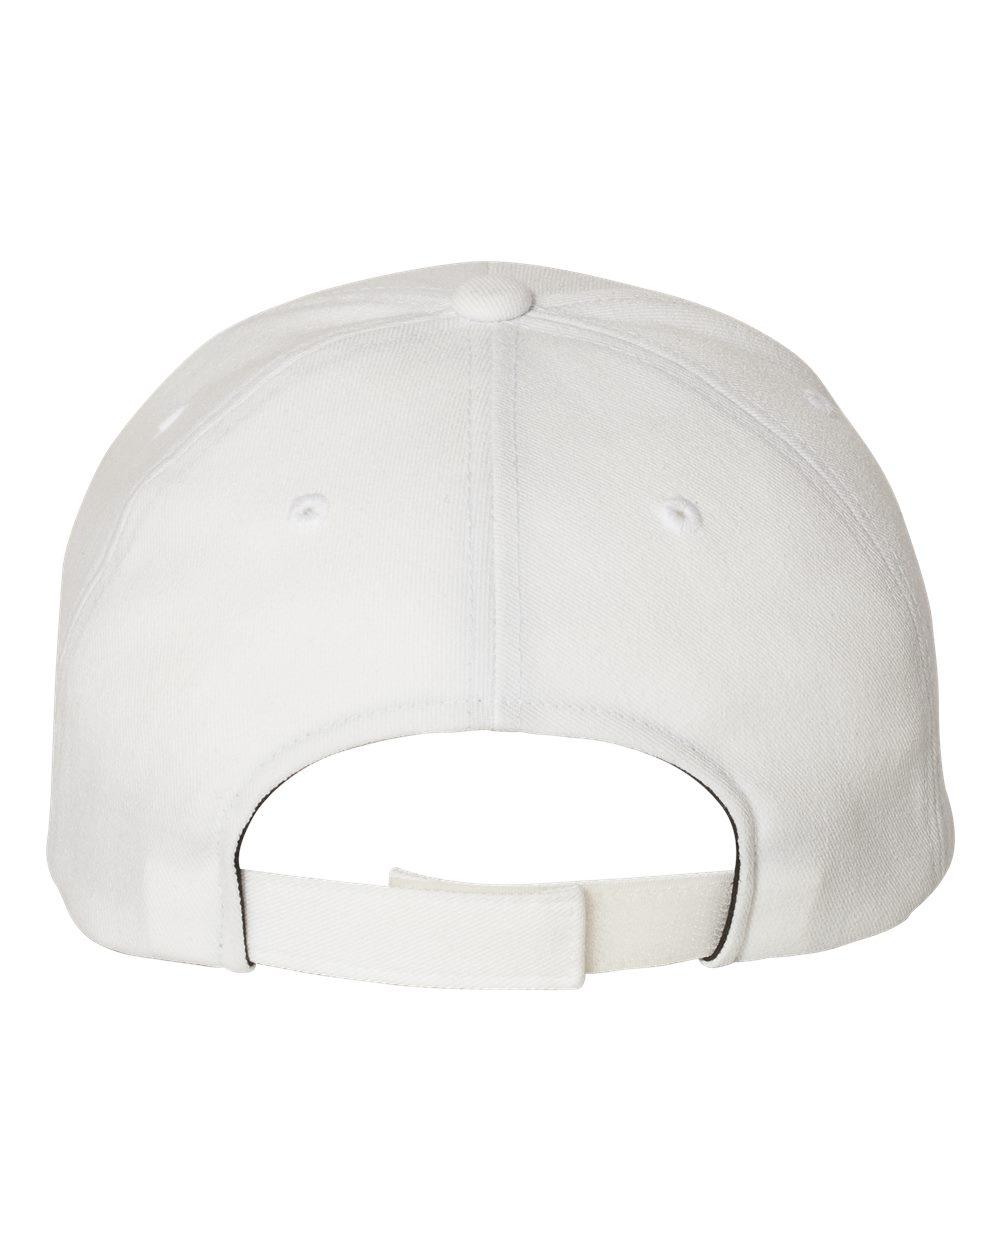 FLEXFIT CAP White Light Blue RHHS letters 97/3 Polyester/Spandex Structured, Six-Panel, Mid-Profile 3-1/2 Crown Permacurv Visor Adjustable Velcro Closure Moisture Wicking Properties One Size $20 RHHS